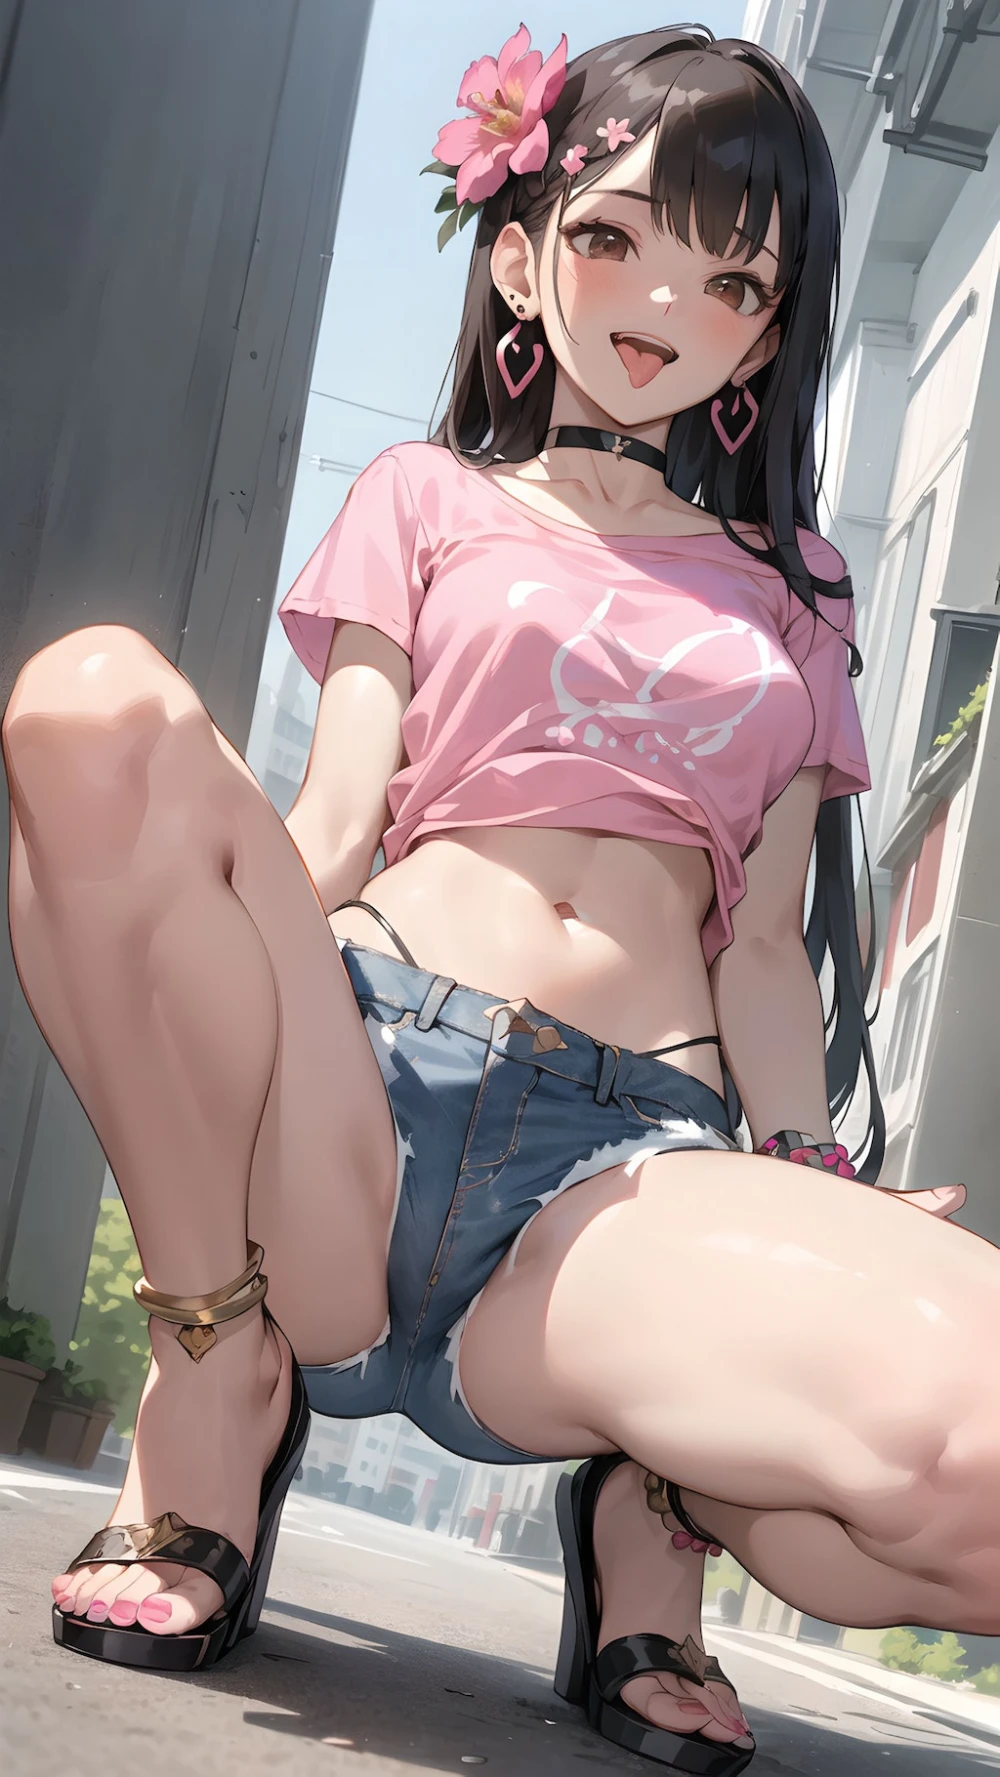 midriff-anime-style-all-ages-19